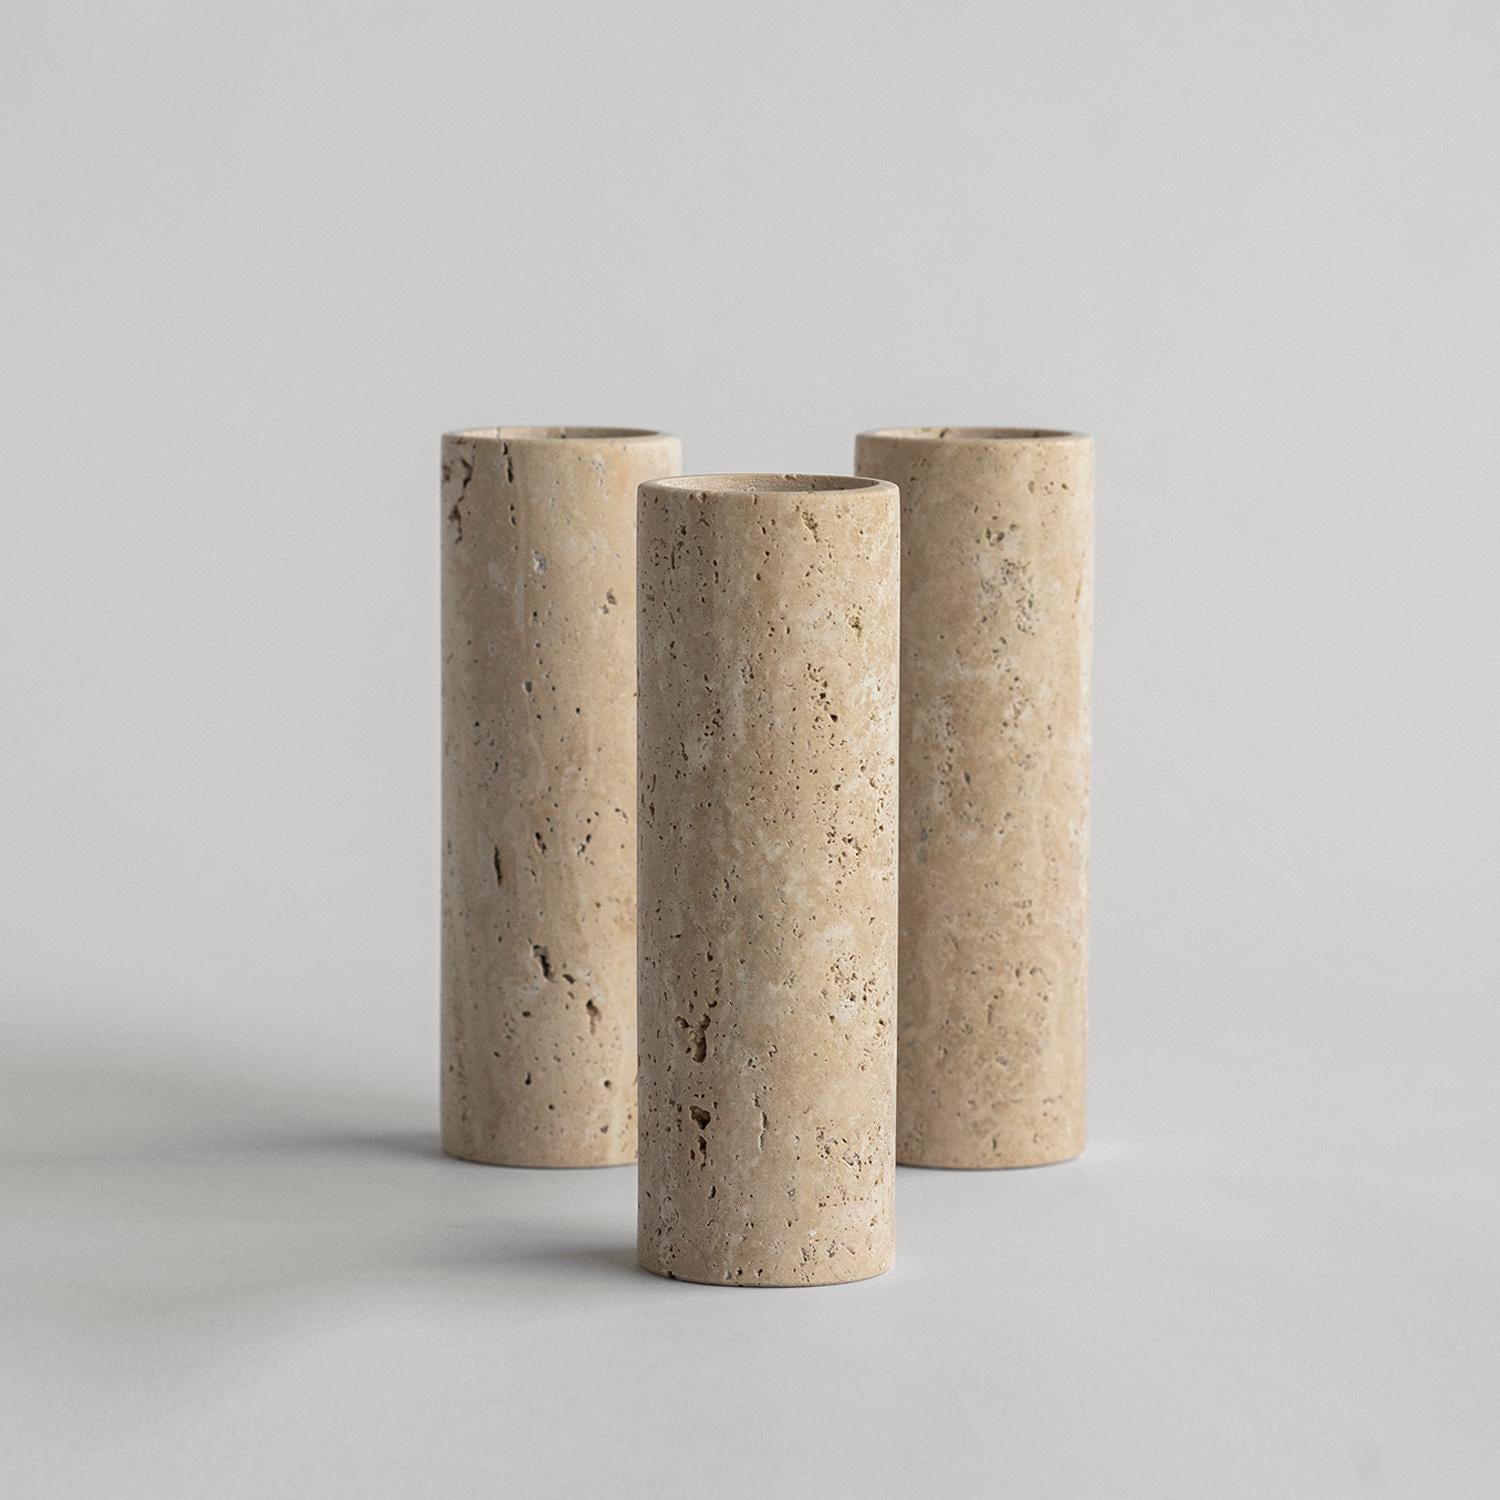 Travertine Tea light holders are sold in a set of 2. 

Stunning, aesthetic, timeless are words that can be used to describe this elegant and modern travertine tea light holder from Kiwano. Expertly crafted and finished by hand, our travertine tea